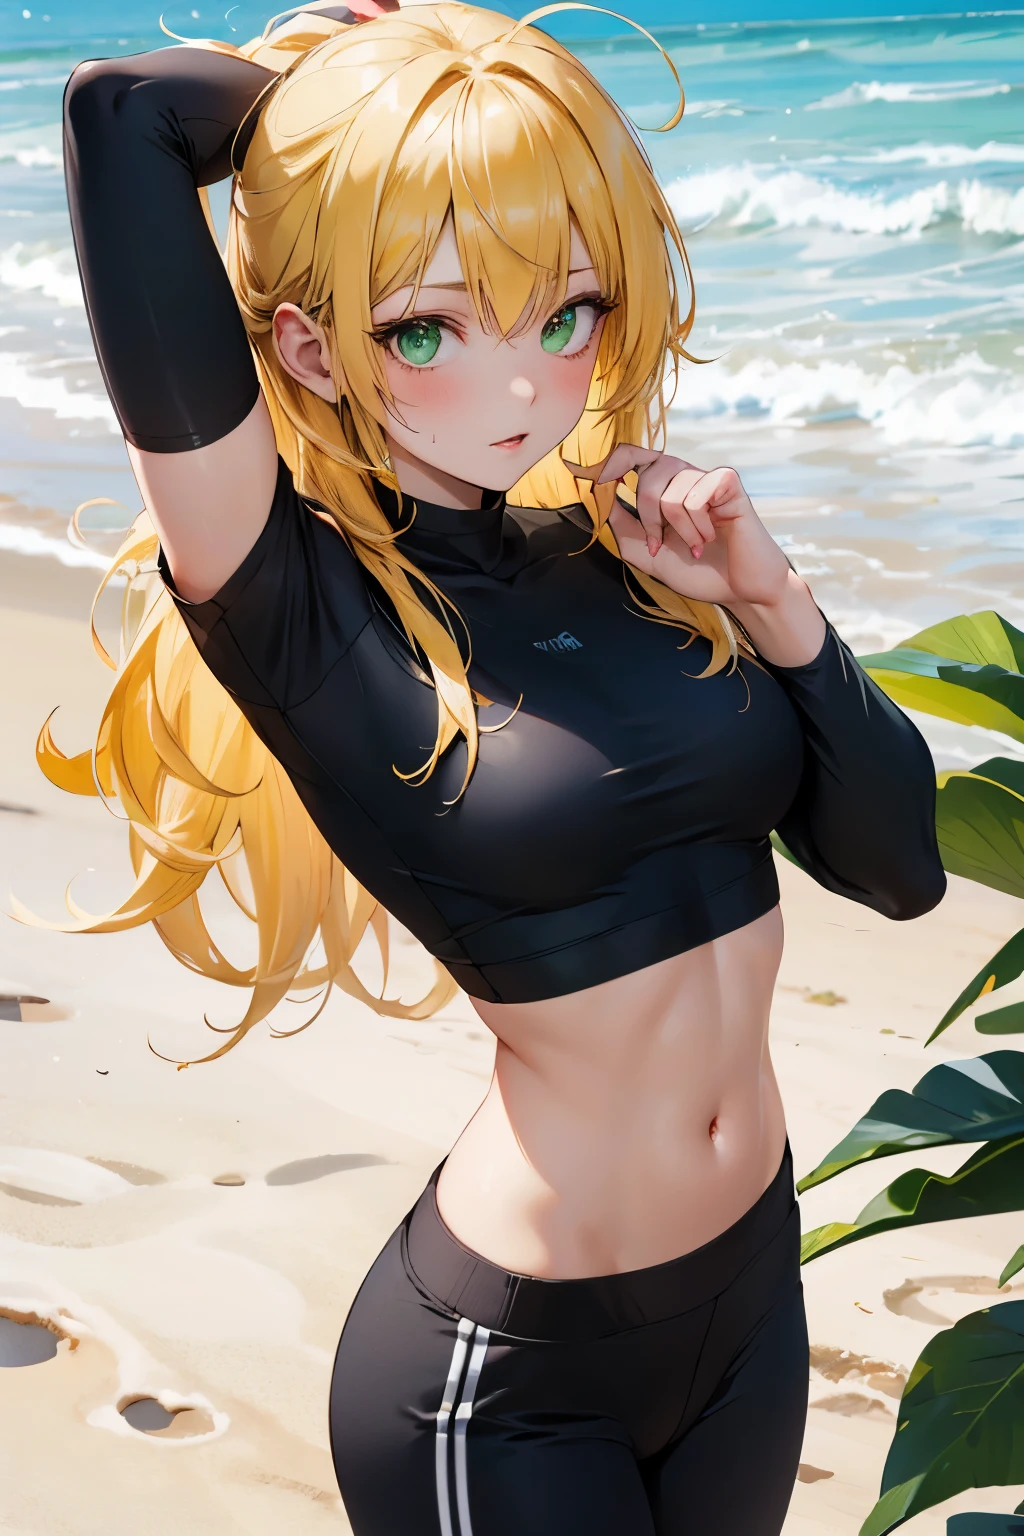 Yellow hair girl, long messy hair, black hair highlights, green eyes, black cropped shirt, with for flower, white sweatpants, madure muscle aesthetic body, in beach